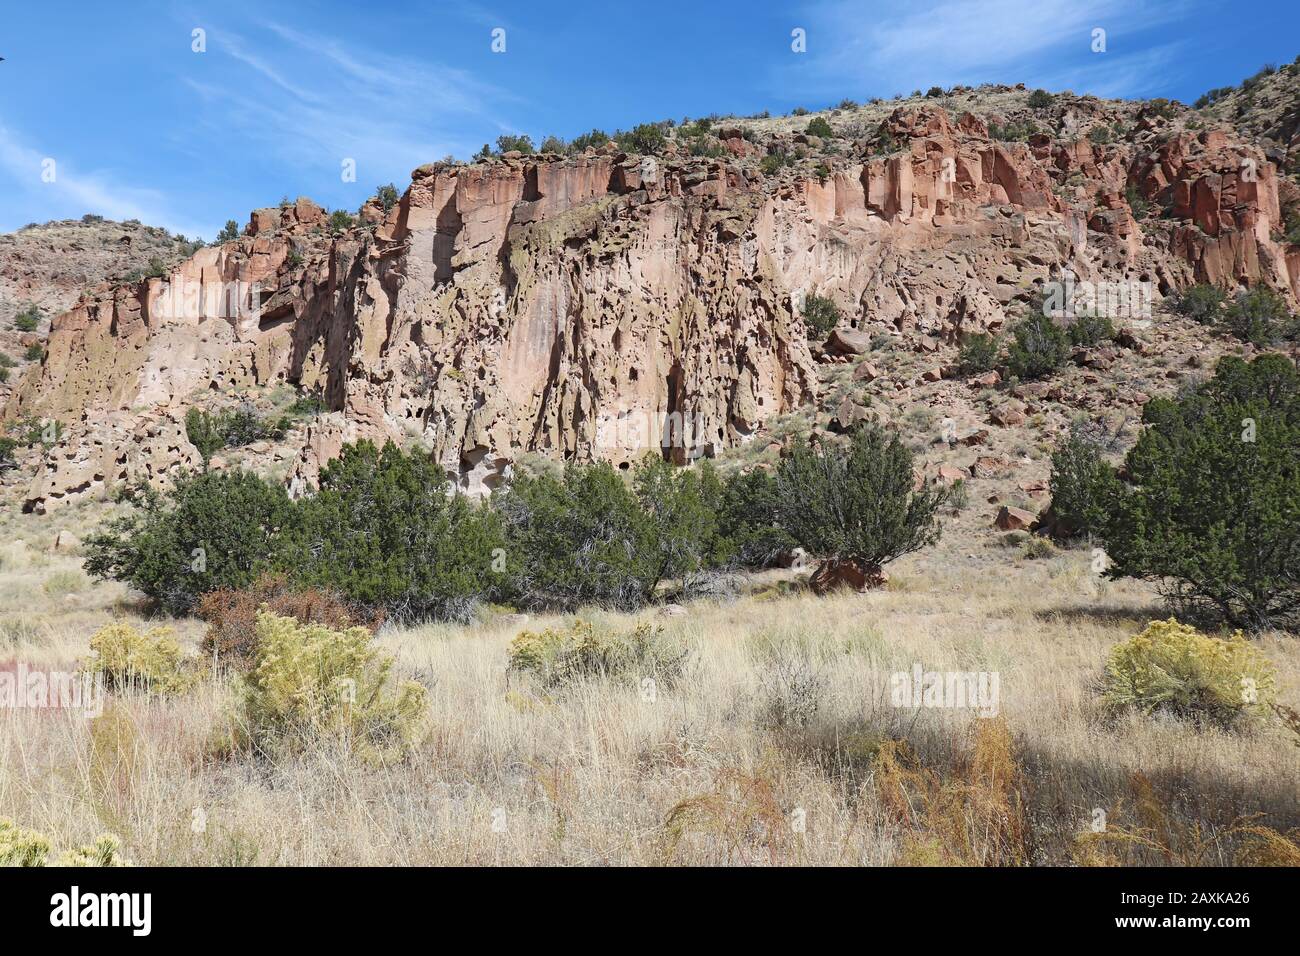 Eroded cliffs and autumn vegetation in Frijoles Canyon at Bandelier National Monument near Los Alamos, New Mexico with a bright blue sky Stock Photo